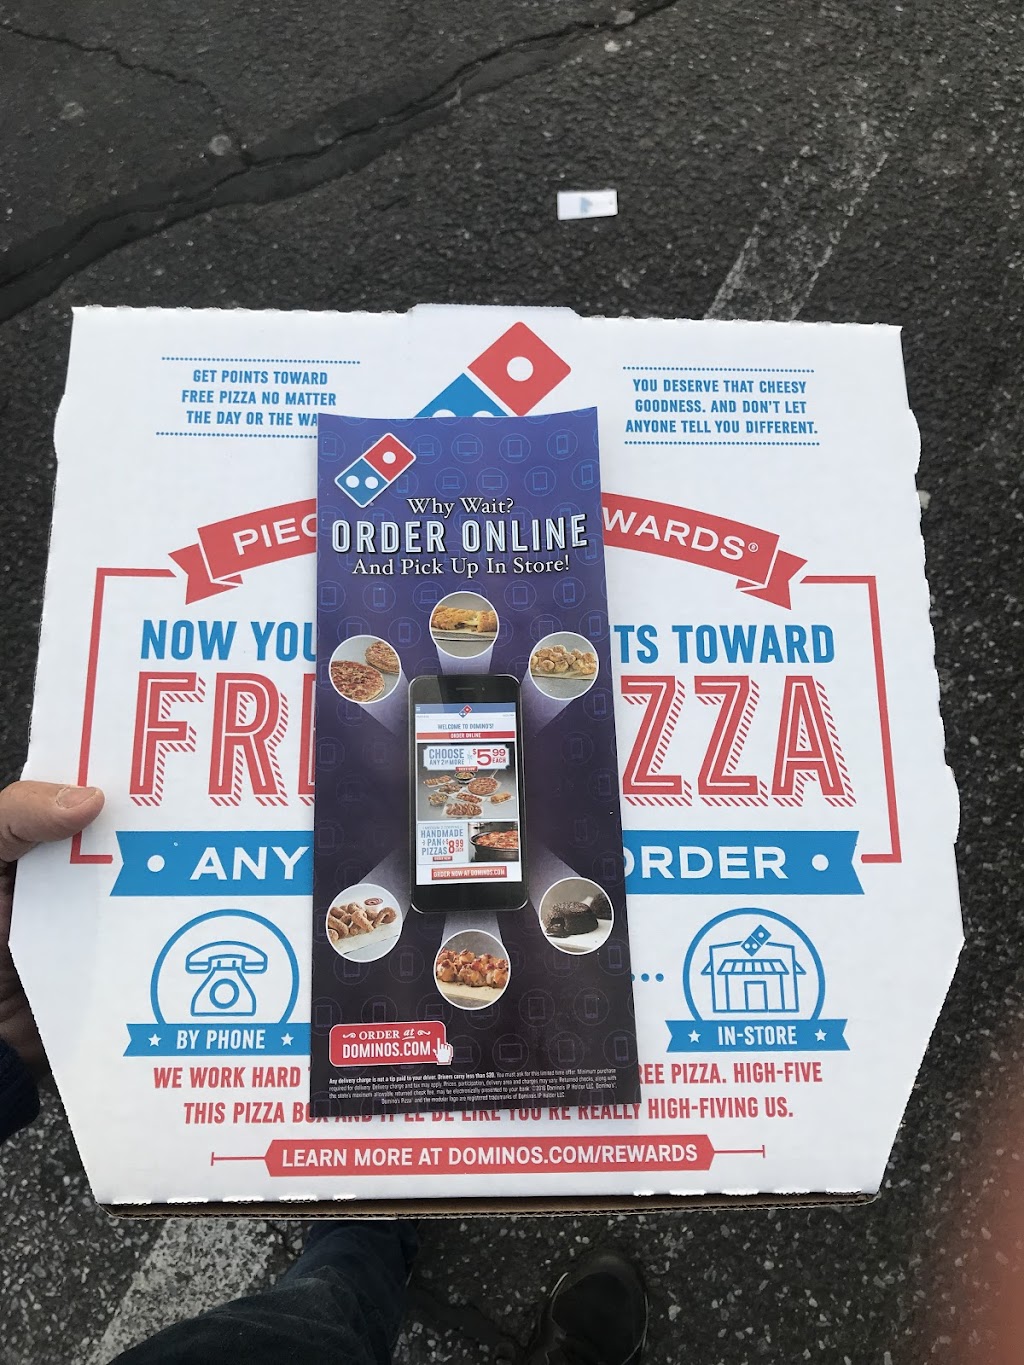 Dominos Pizza | 158 Old Country Rd, Riverhead, NY 11901 | Phone: (631) 369-9090